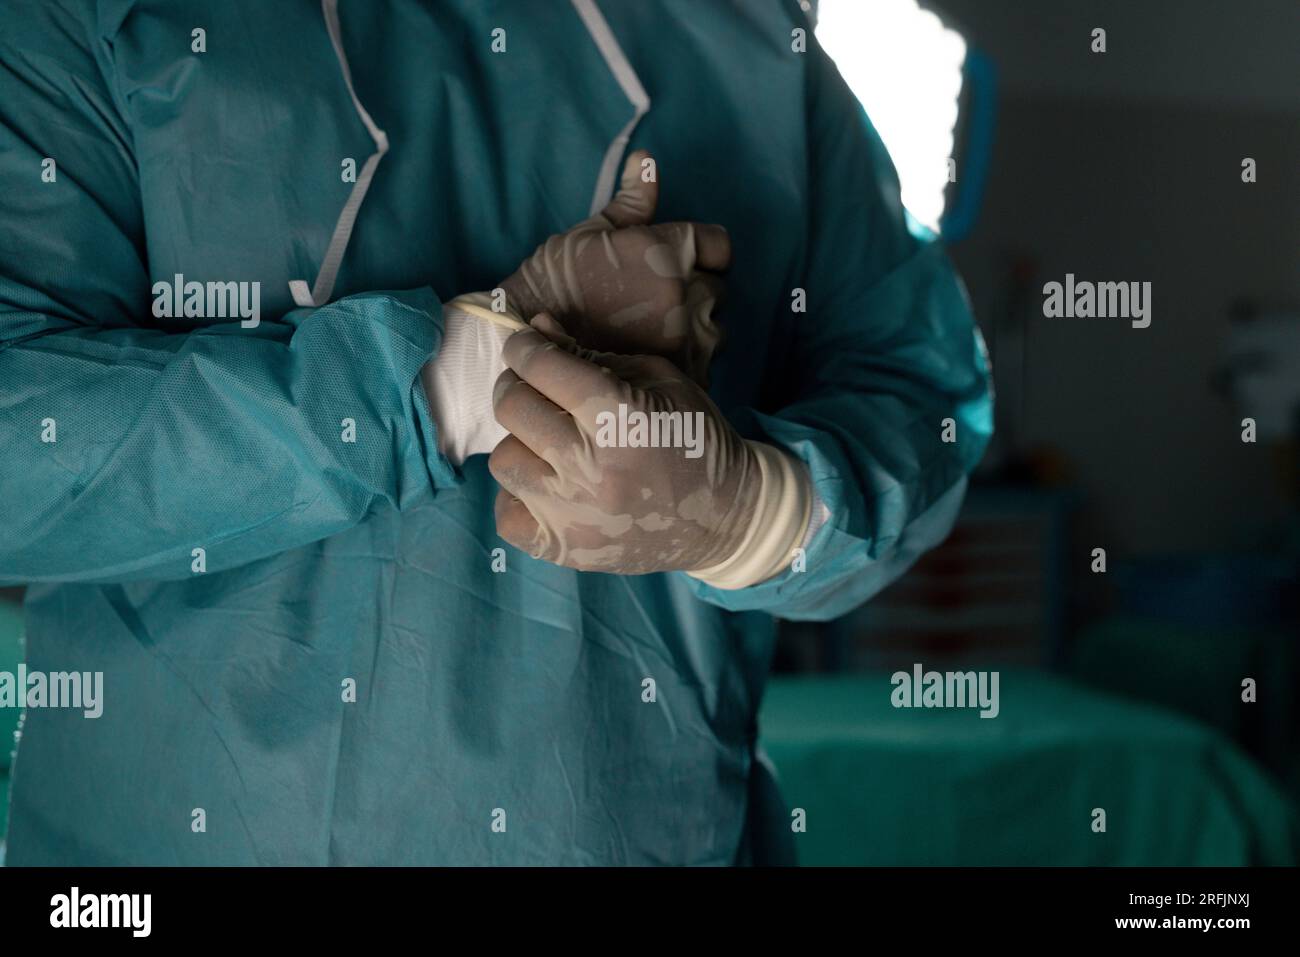 Midsection of biracial male surgeon wearing surgical gown in operating theatre at hospital Stock Photo